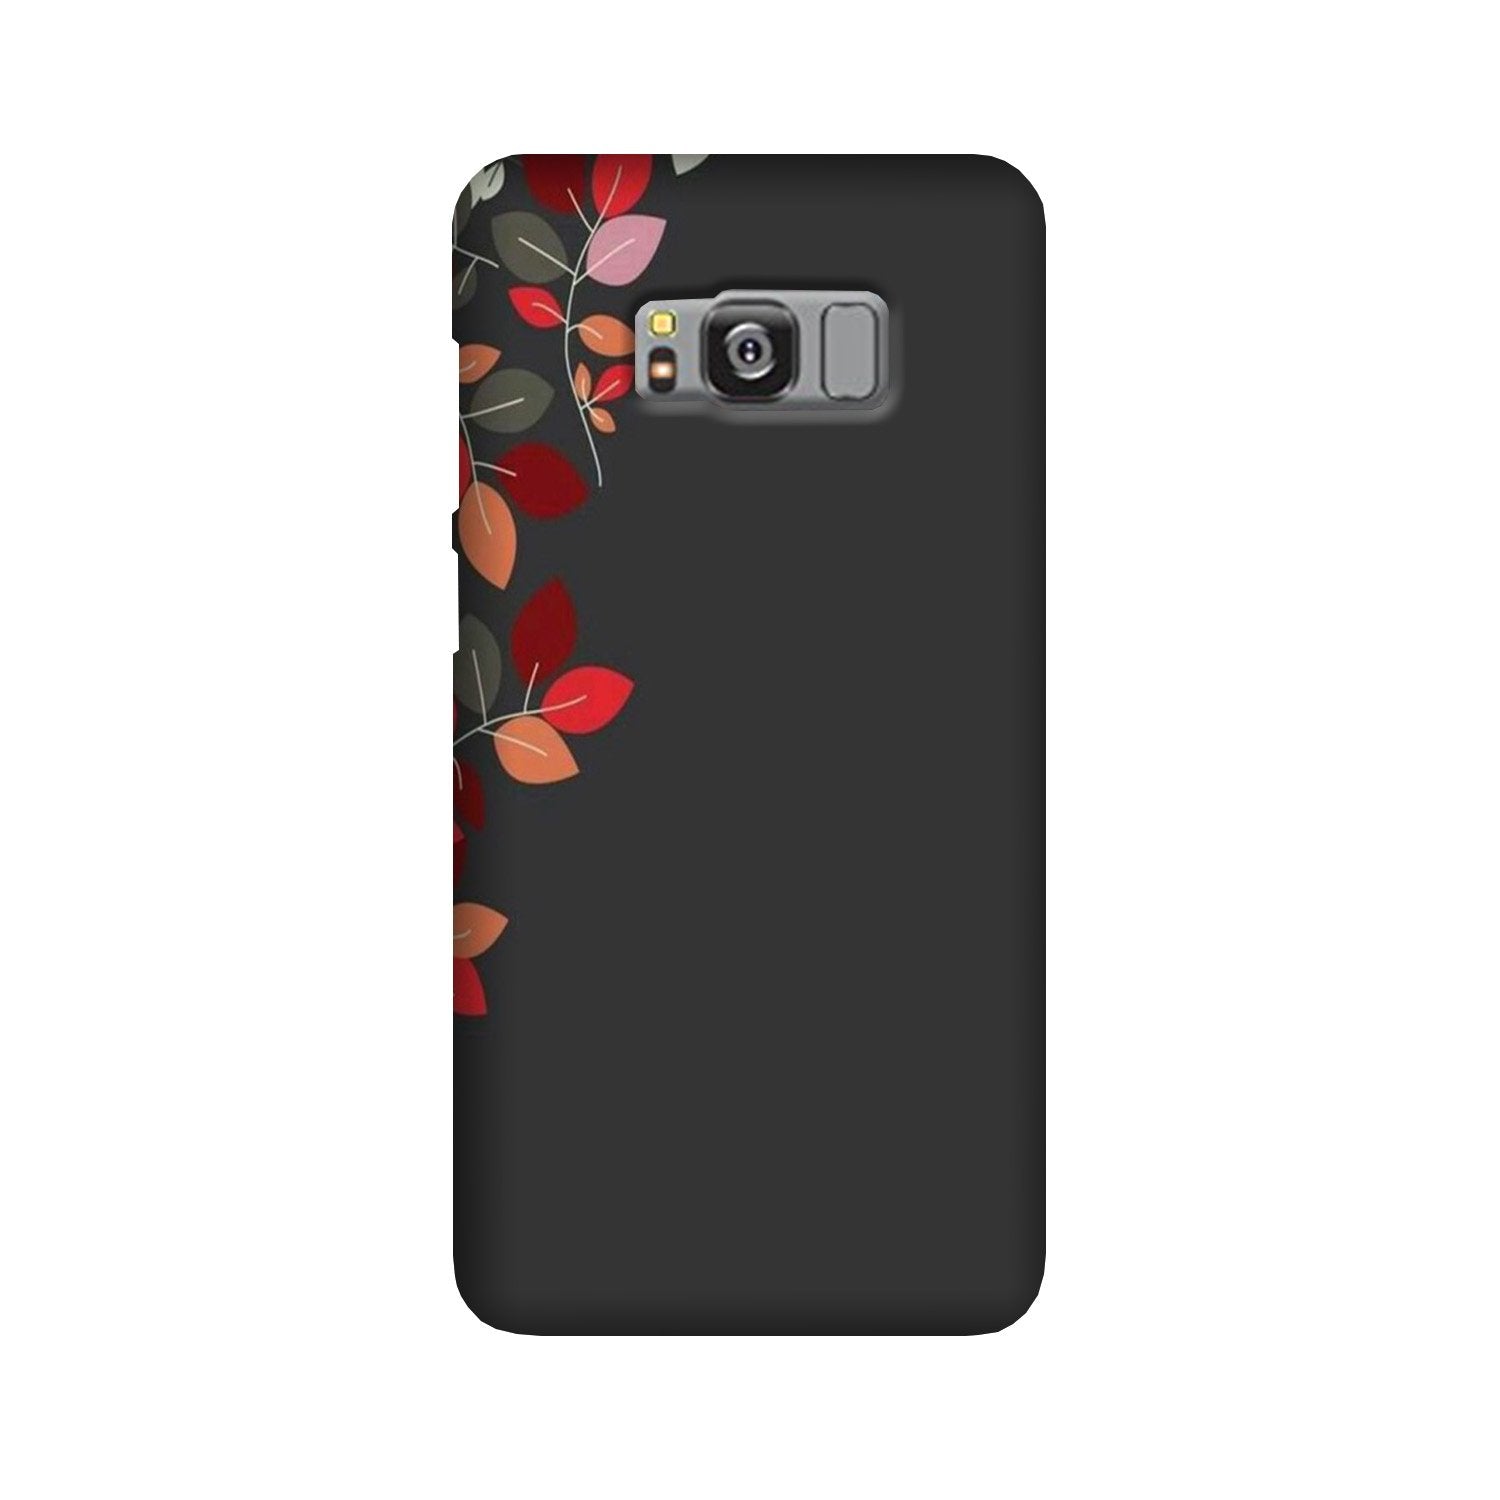 Grey Background Case for Galaxy S8